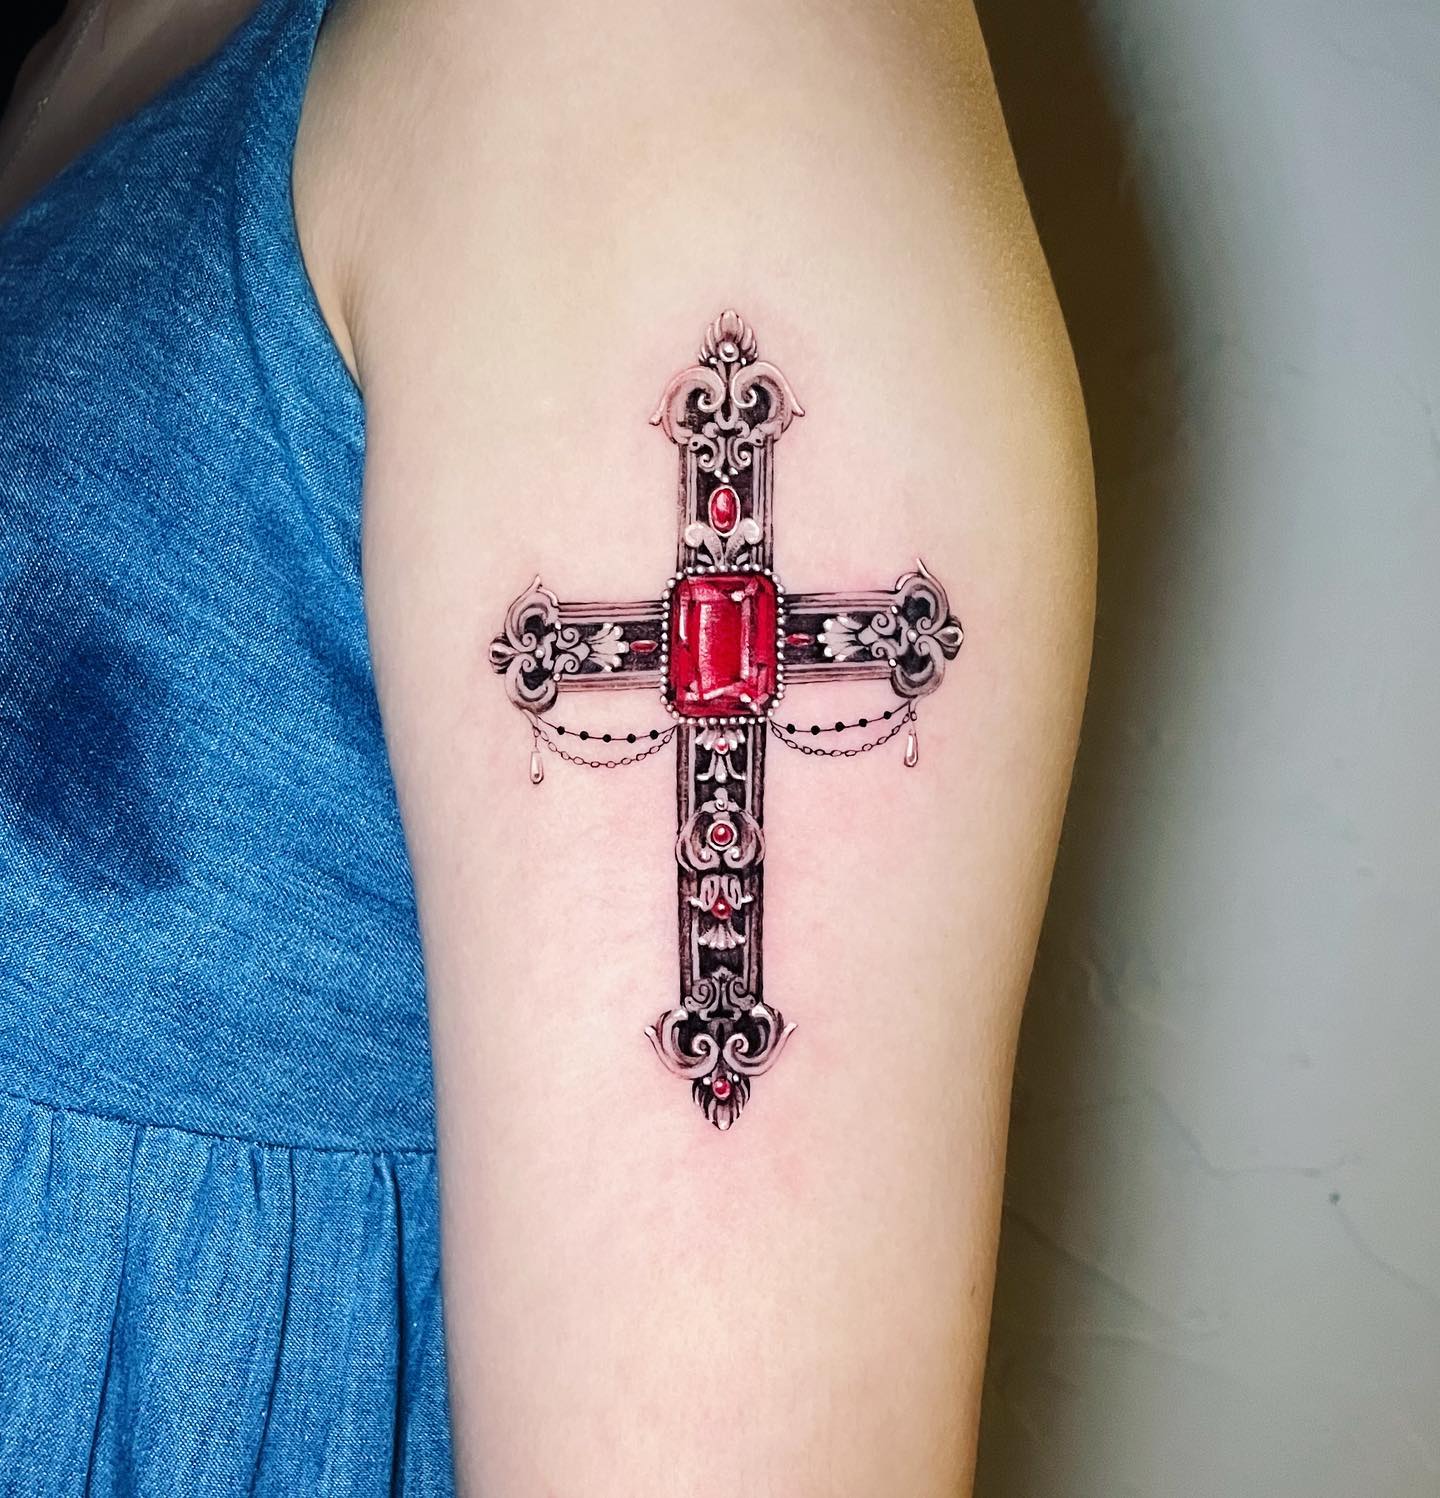 A ruby is a pinkish red gemstone that is one of the most expensive stones. This beautiful and precious gemstone is placed in the middle of the cross above. For upper and lower parts of it, little rubies are added and when you look at the whole design, it is a pure perfection.